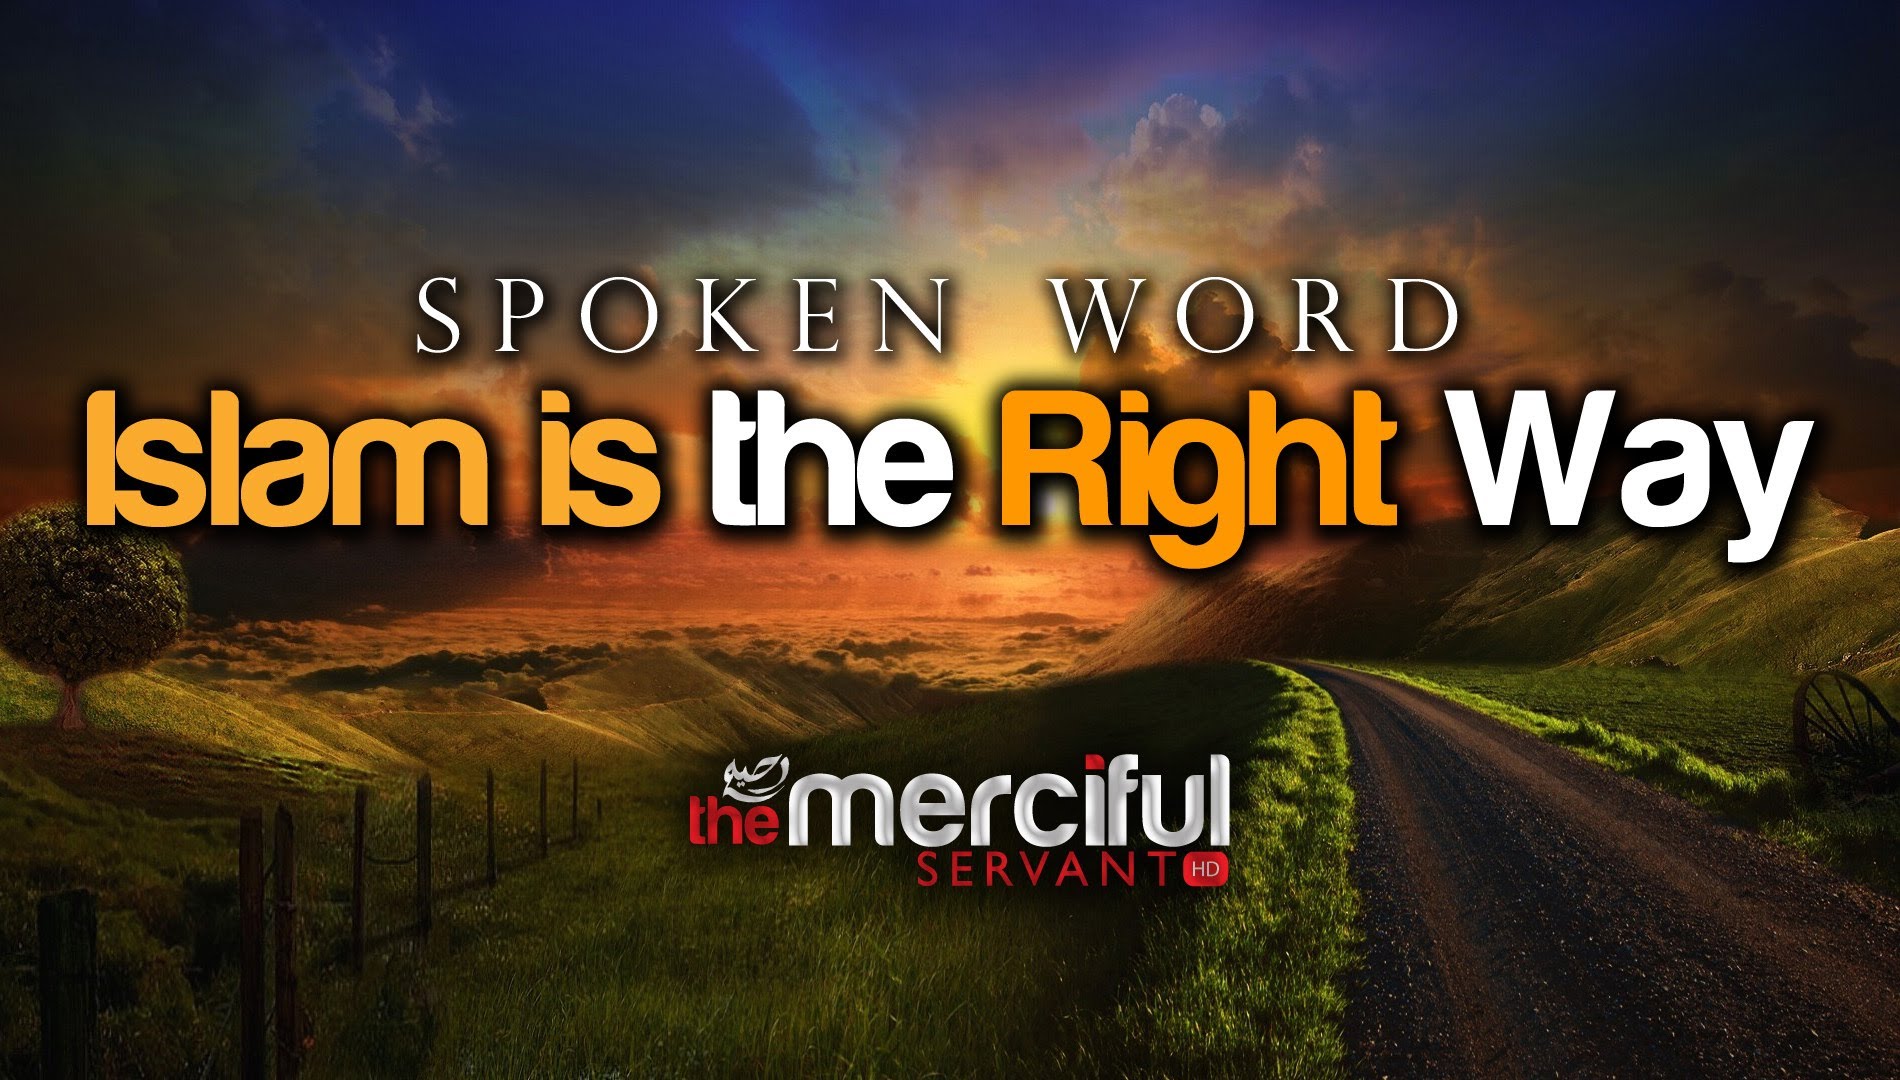 Islam is the Right Way - Spoken Word ᴴᴰ